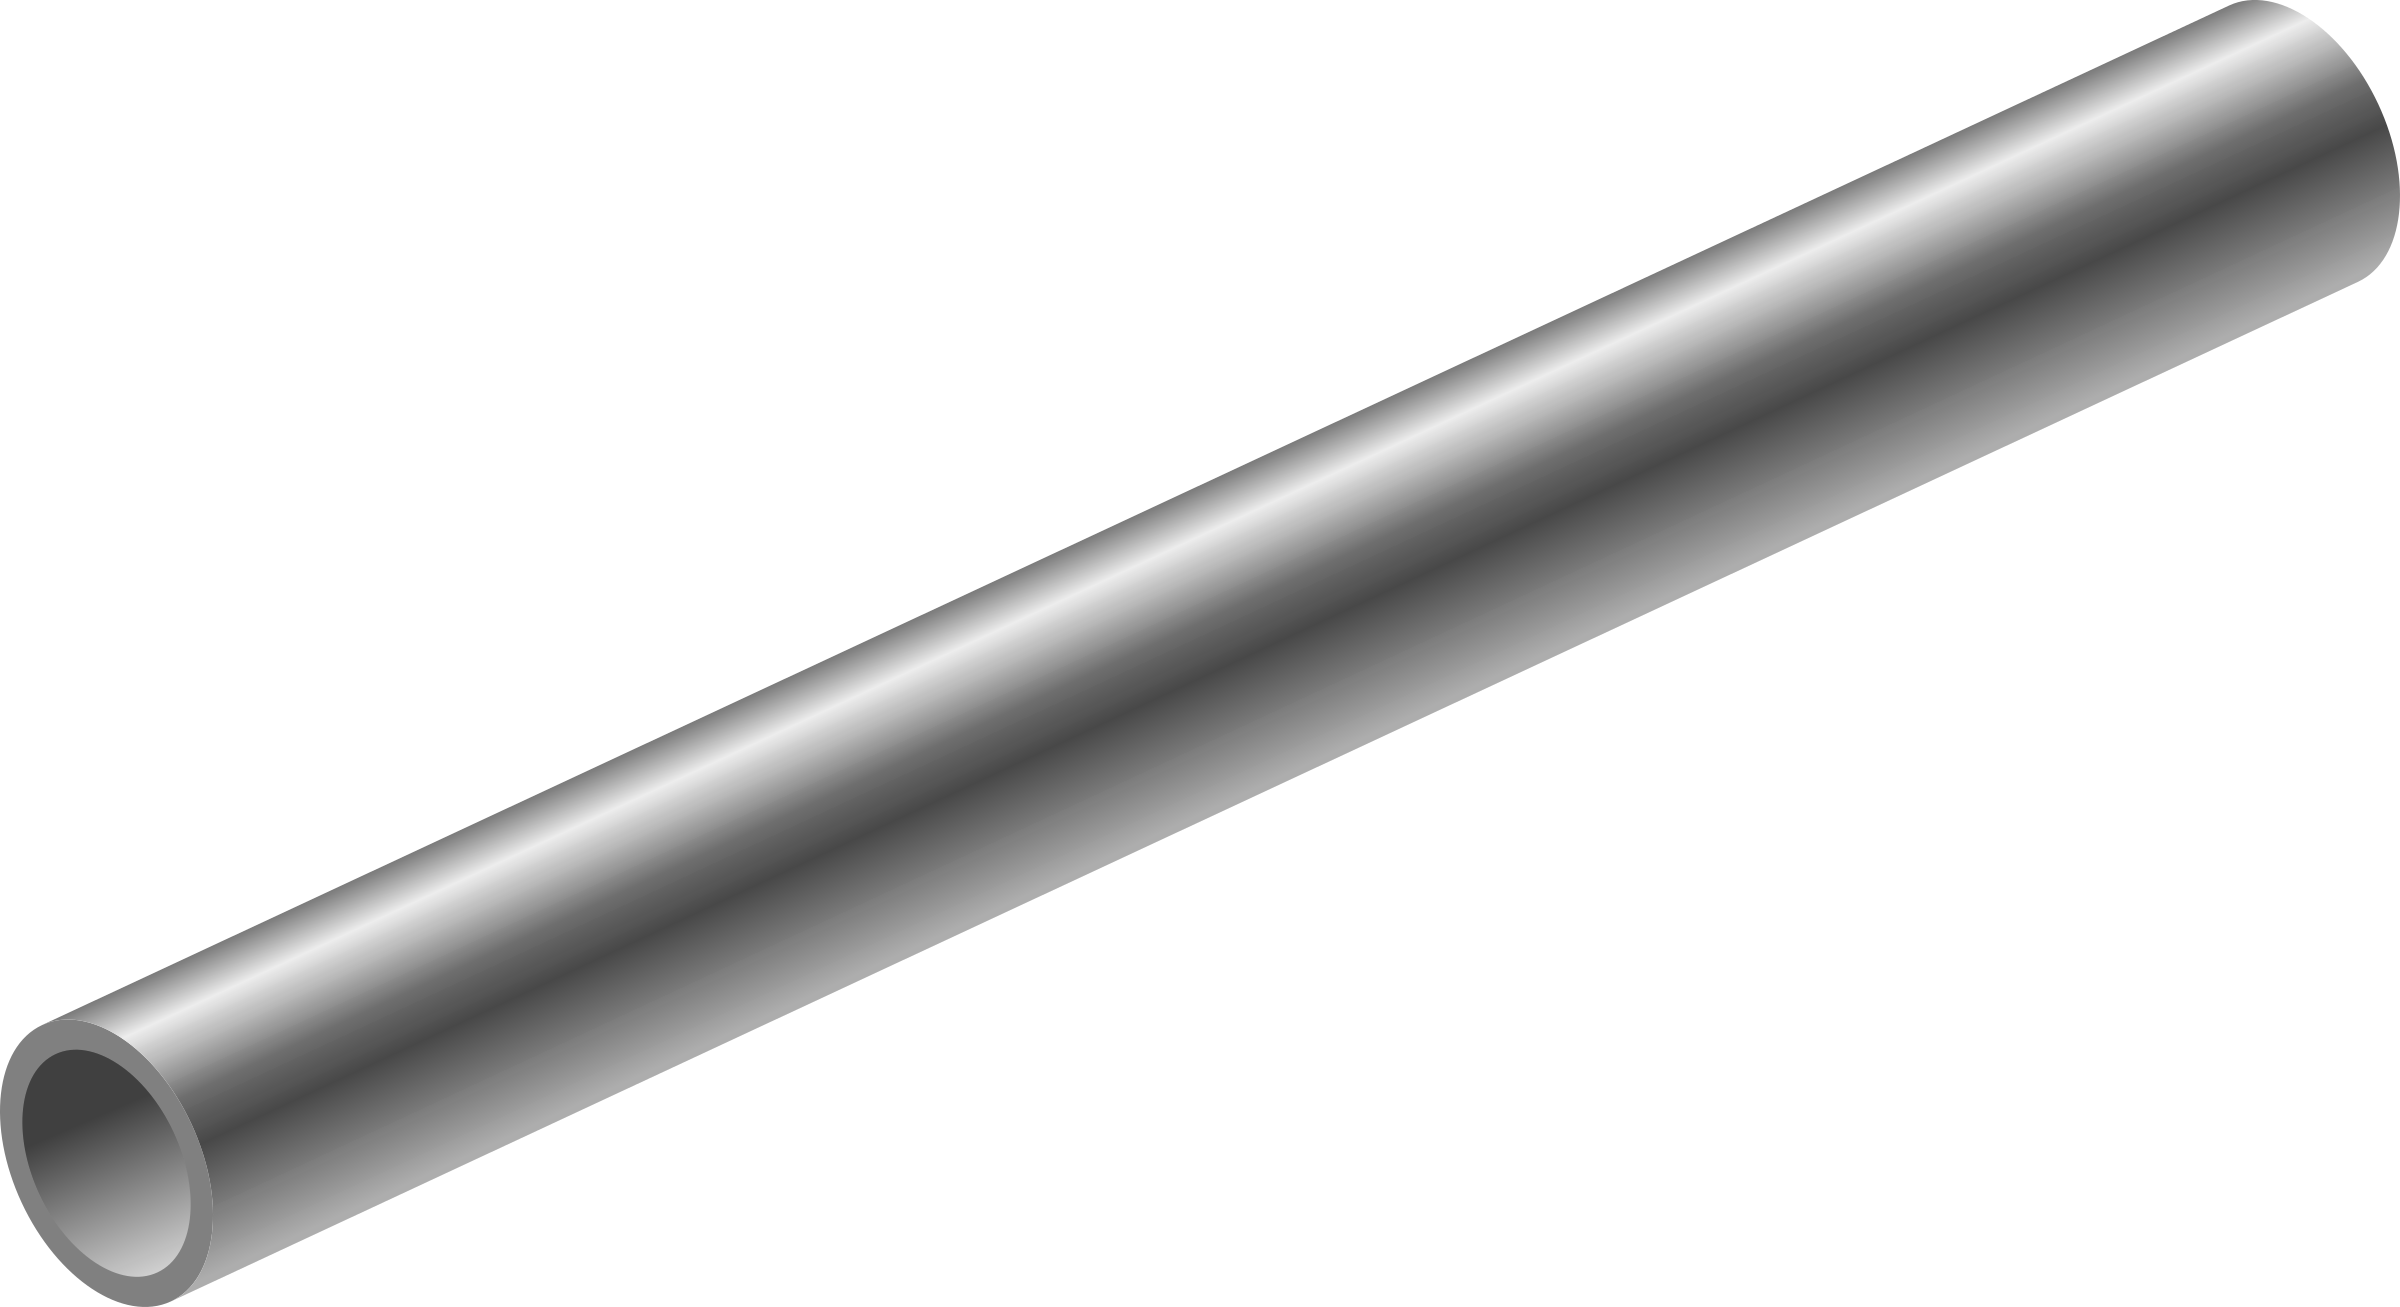 Pipe - Pvc Pipe Transparent Background (2400x1307)